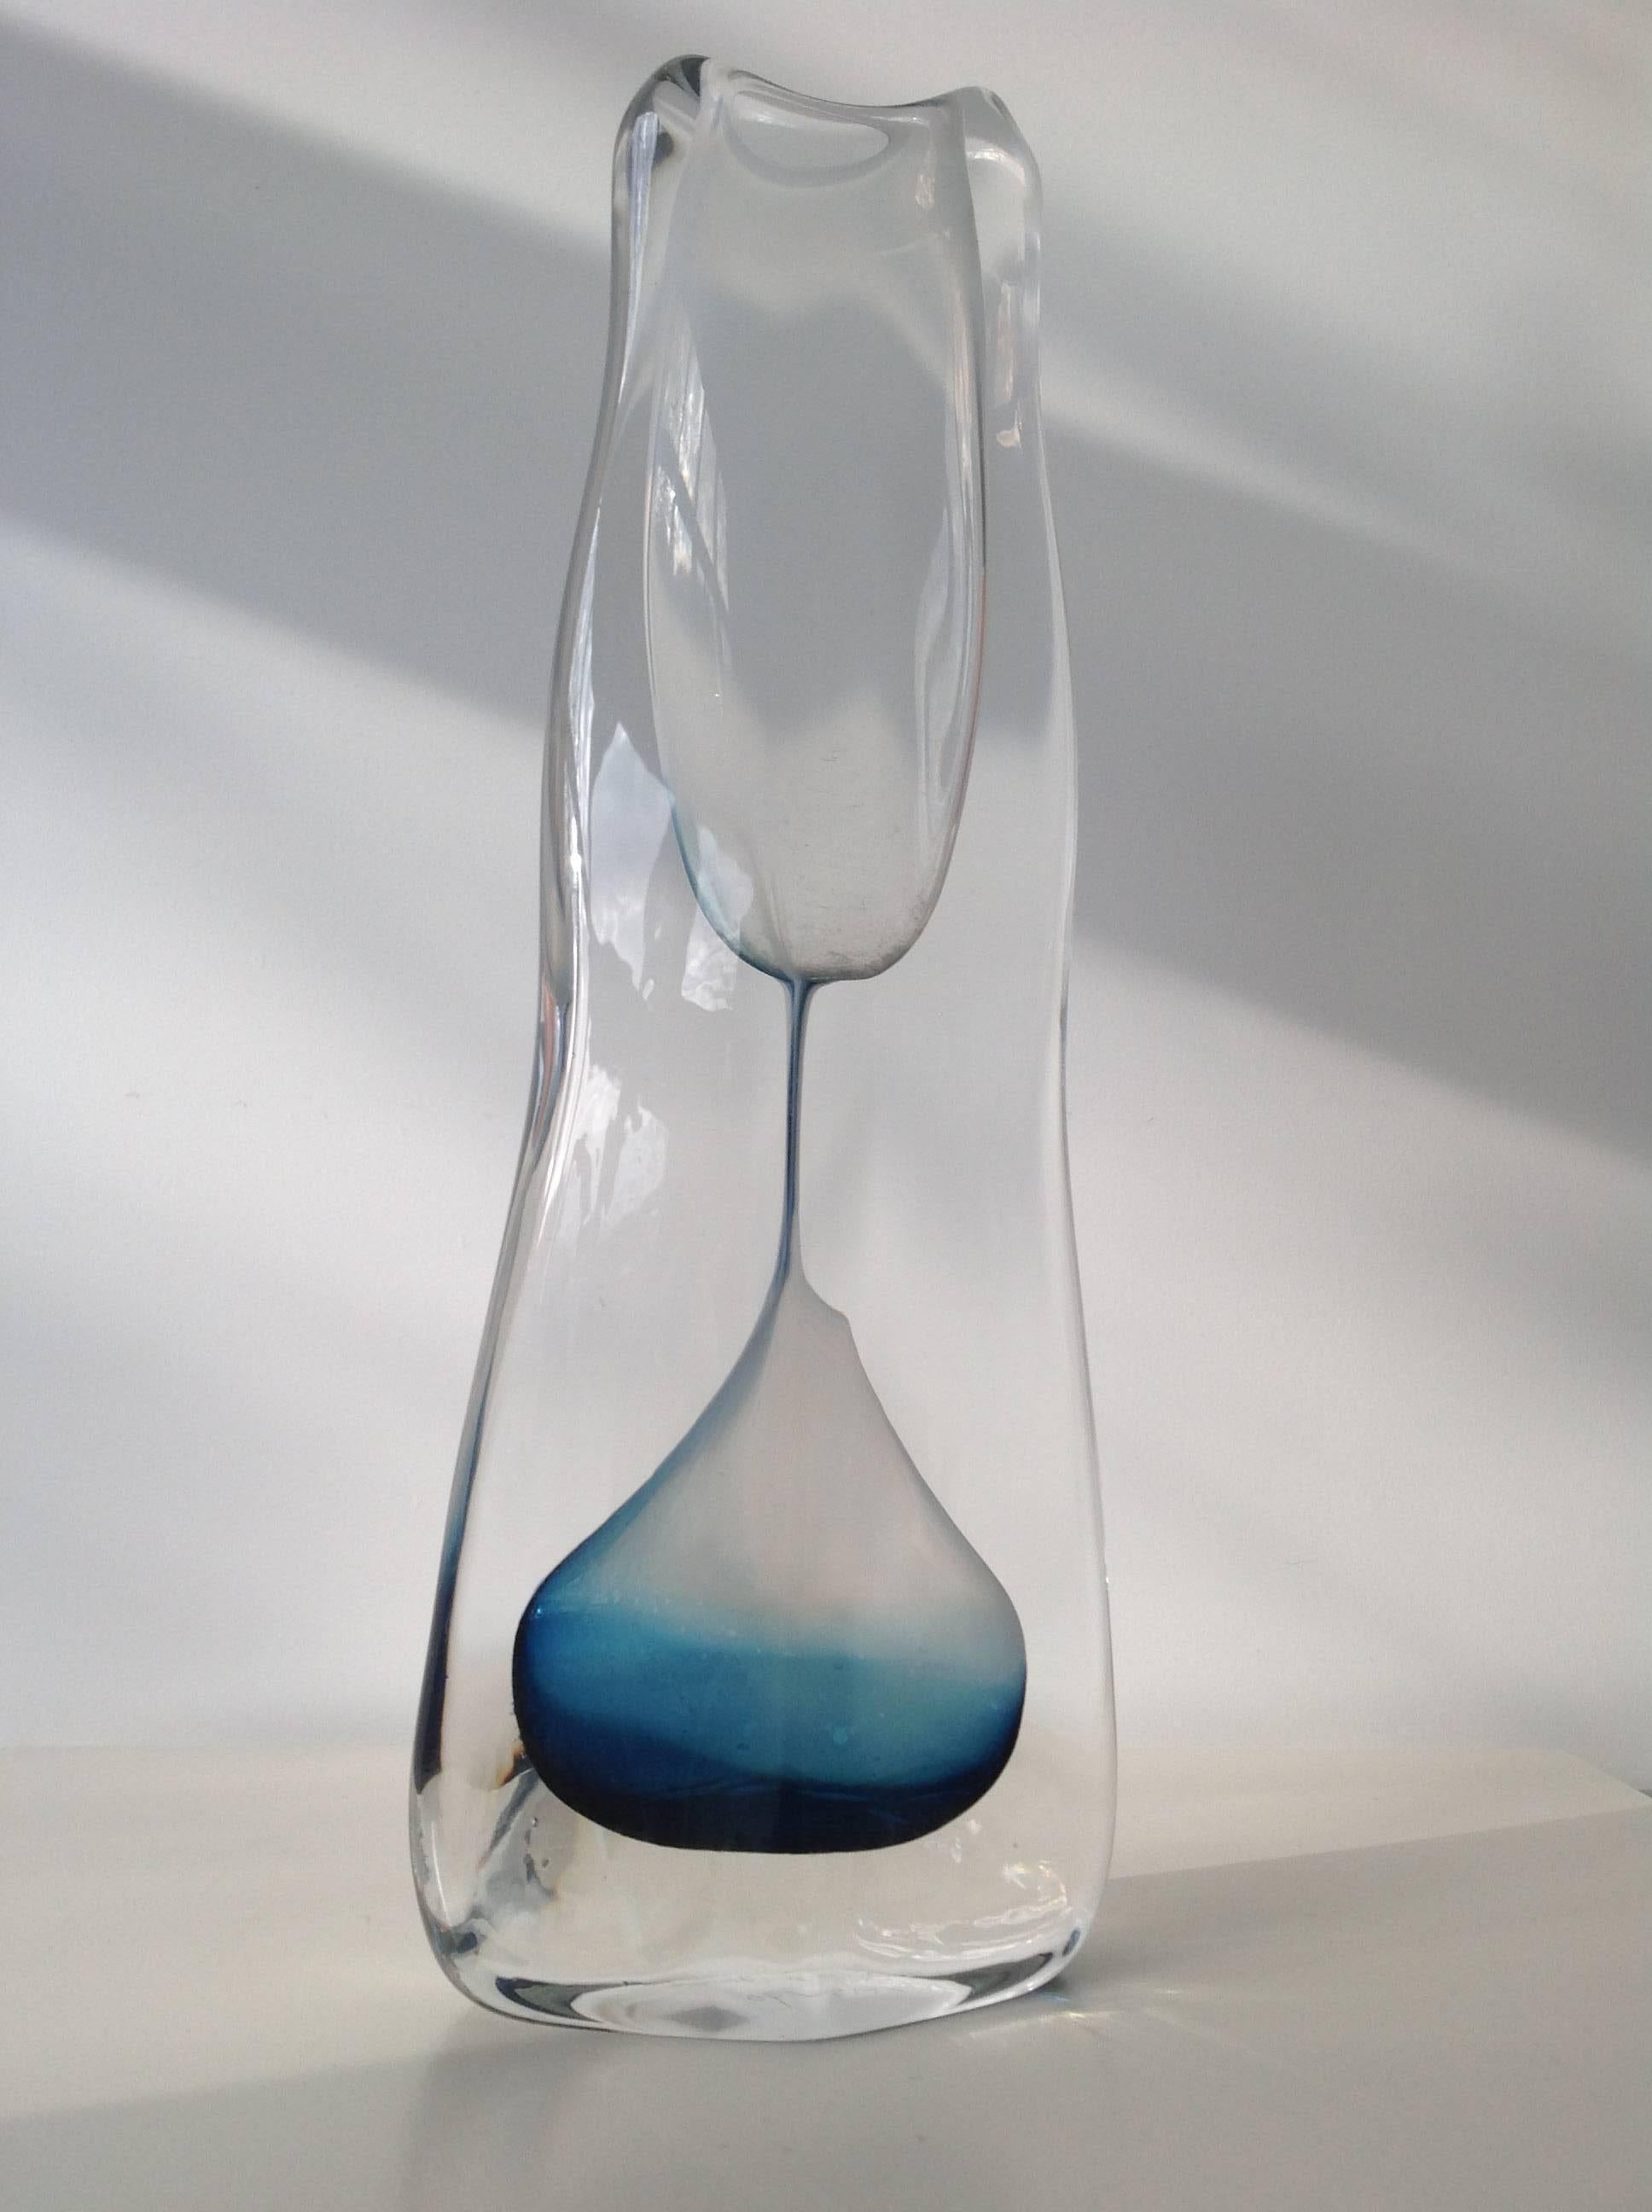 Designed by glassartist Floris Meydam(1919-2011) executed at the Glassworks Leerdam in Leerdam.
Colorless glass with an 